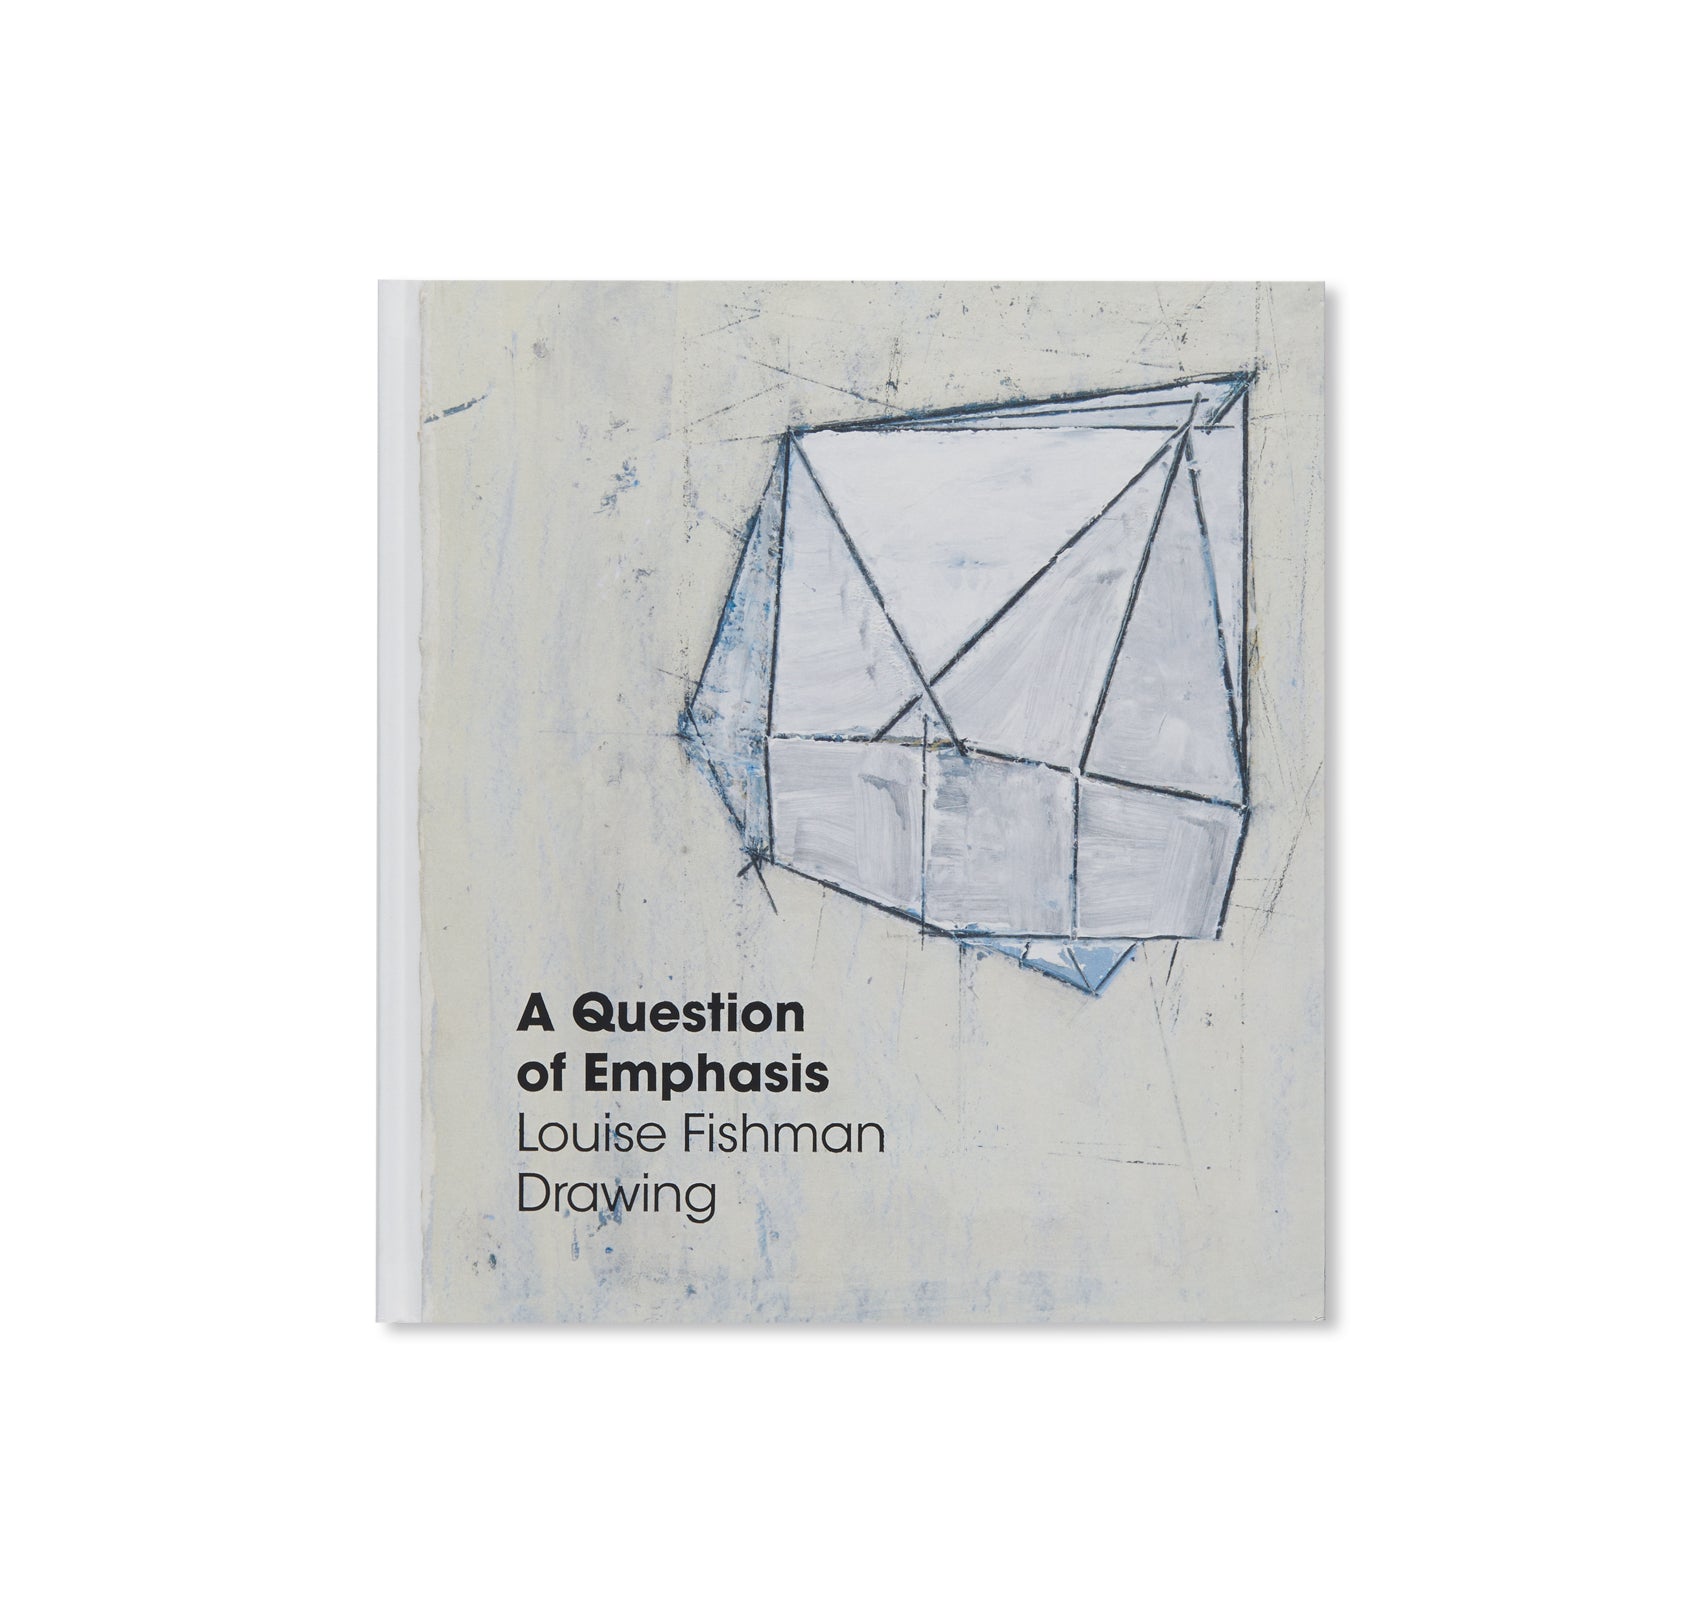 A QUESTION OF EMPHASIS: LOUISE FISHMAN DRAWING by Louise Fishman